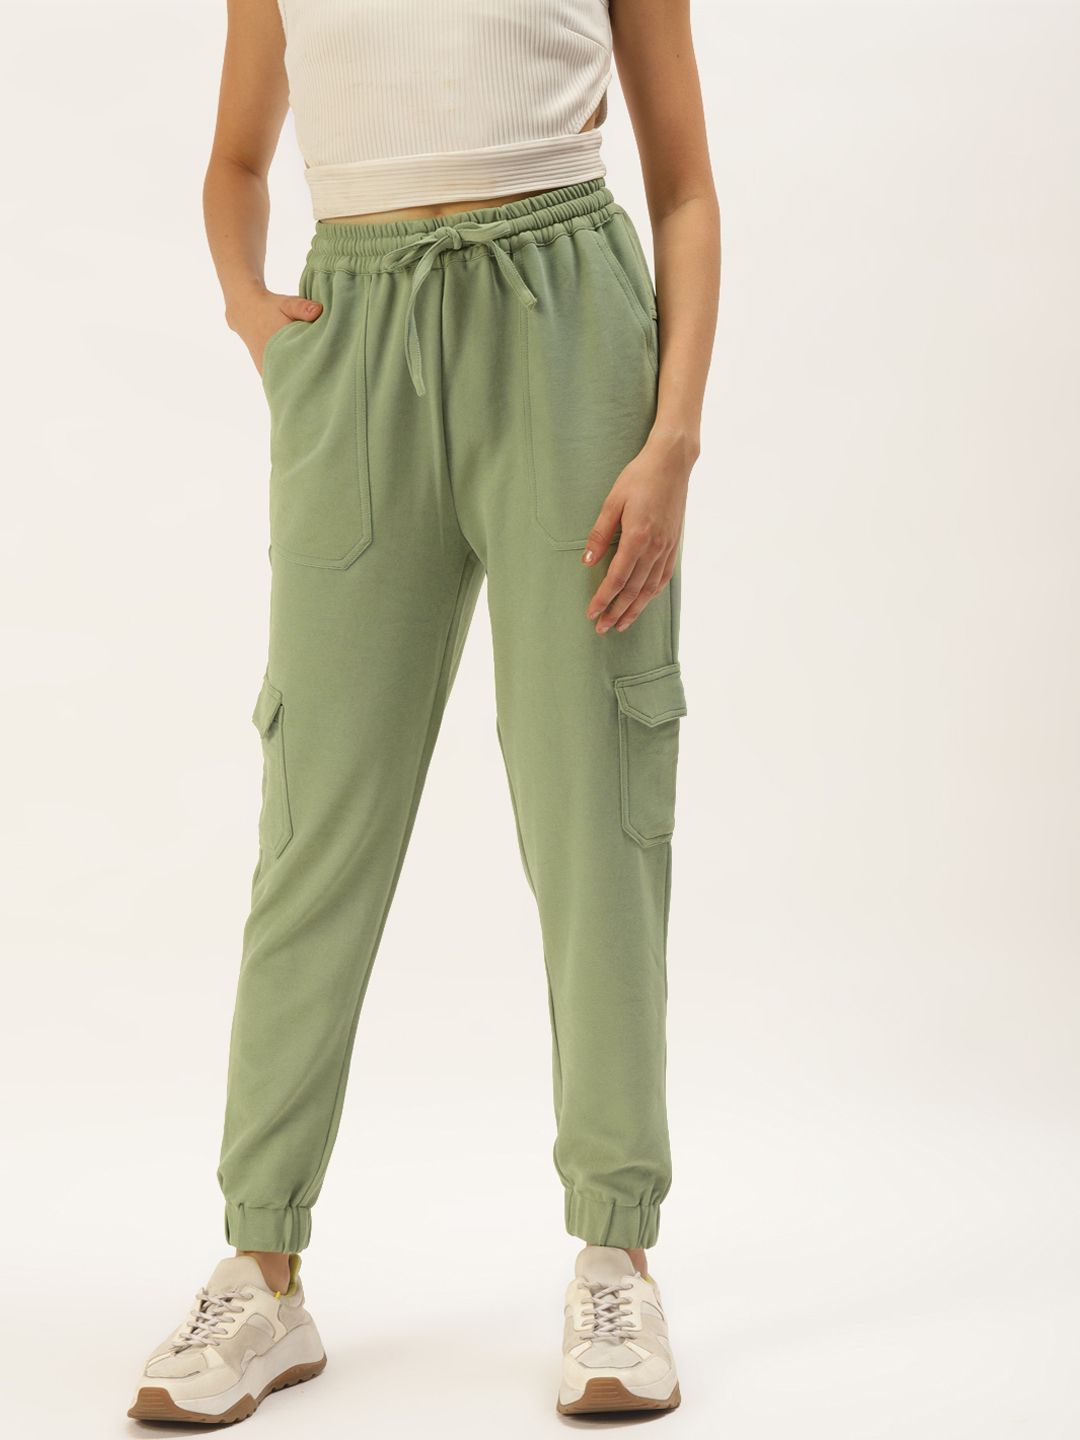 Zastraa Women Green Loose Fit Joggers Trousers Price in India